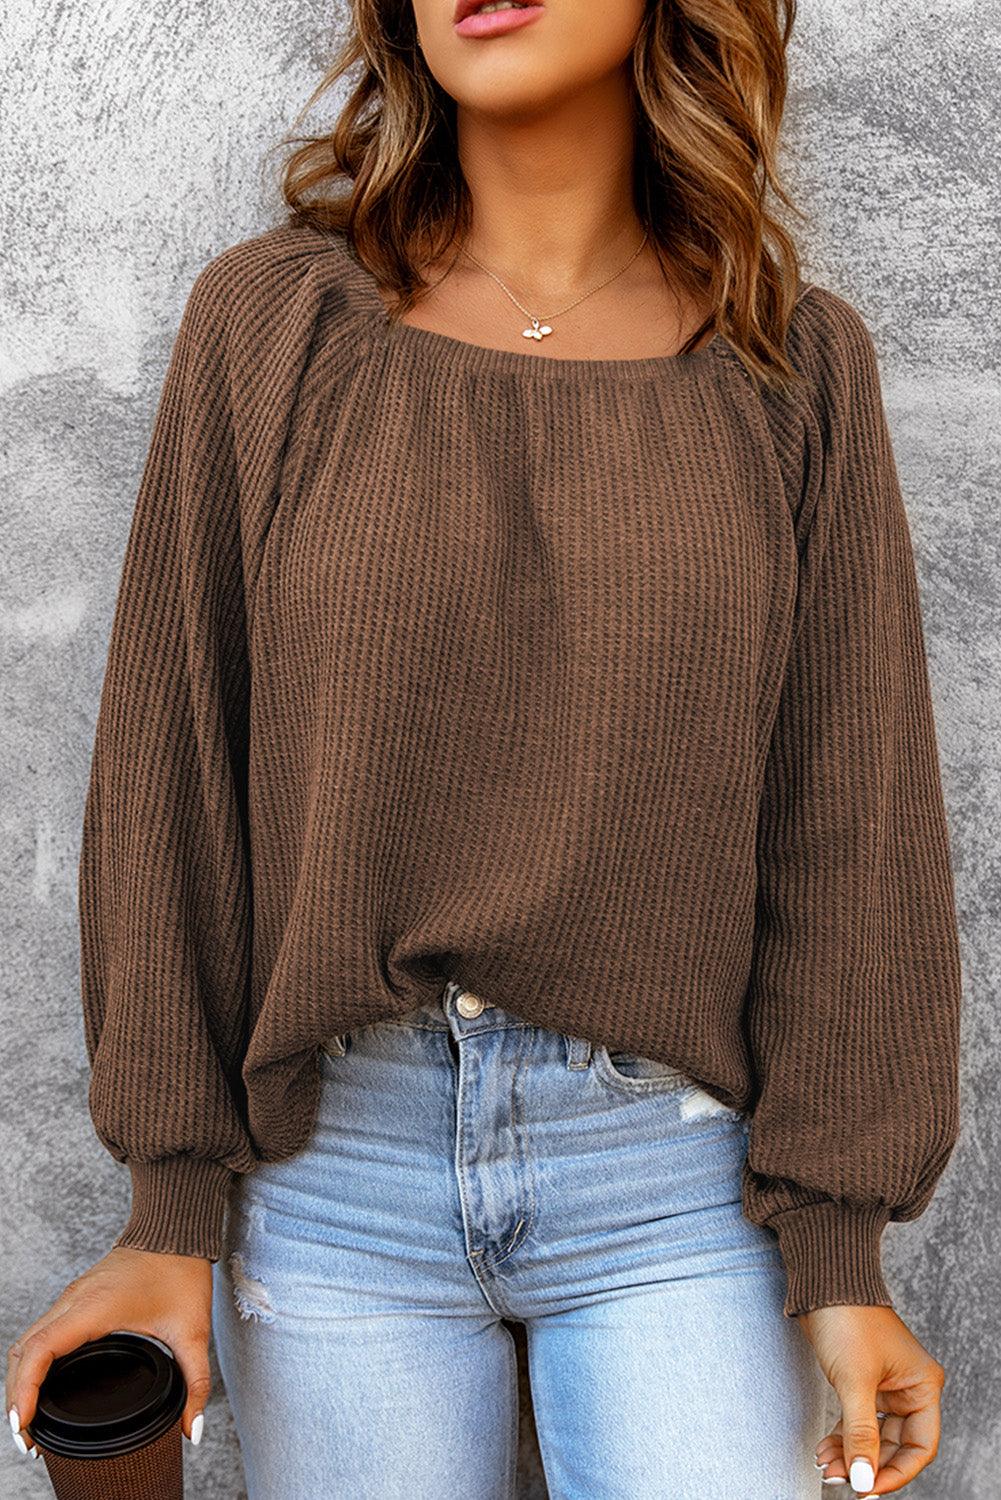 Square Neck Puff Sleeve Waffle Knit Top - L & M Kee, LLC